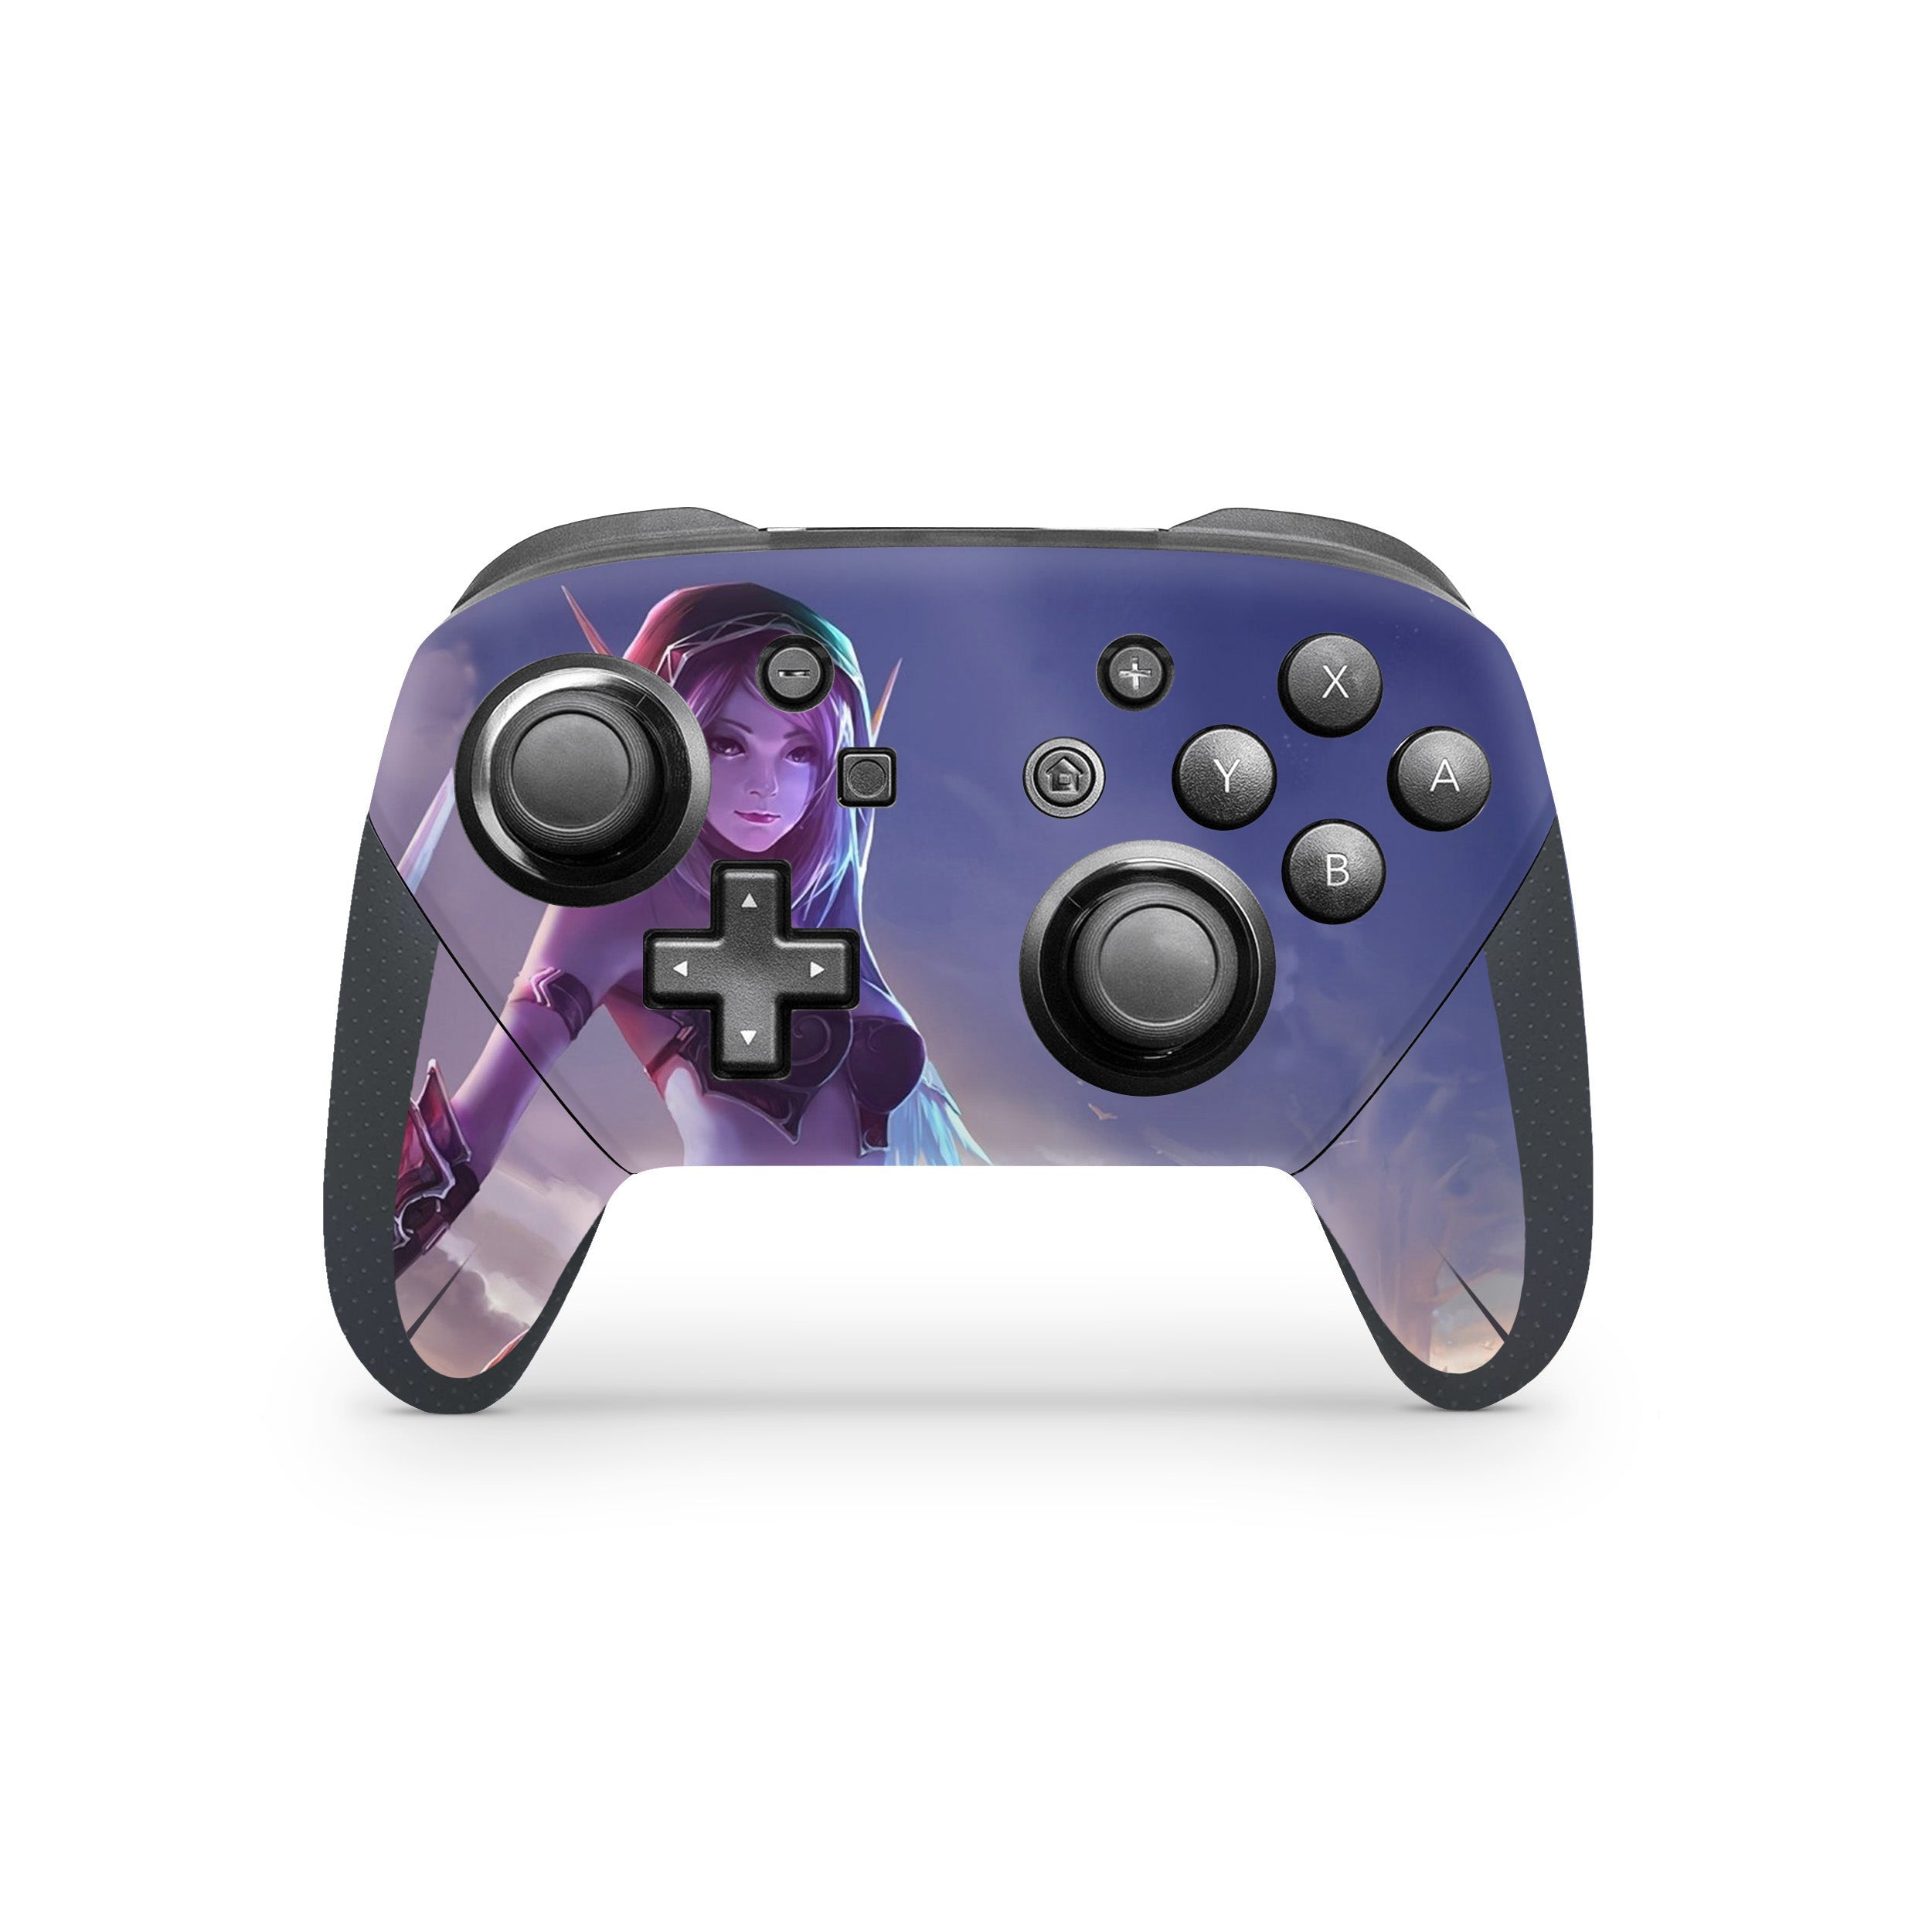 A video game skin featuring a World of Warcraft design for the Switch Pro Controller.